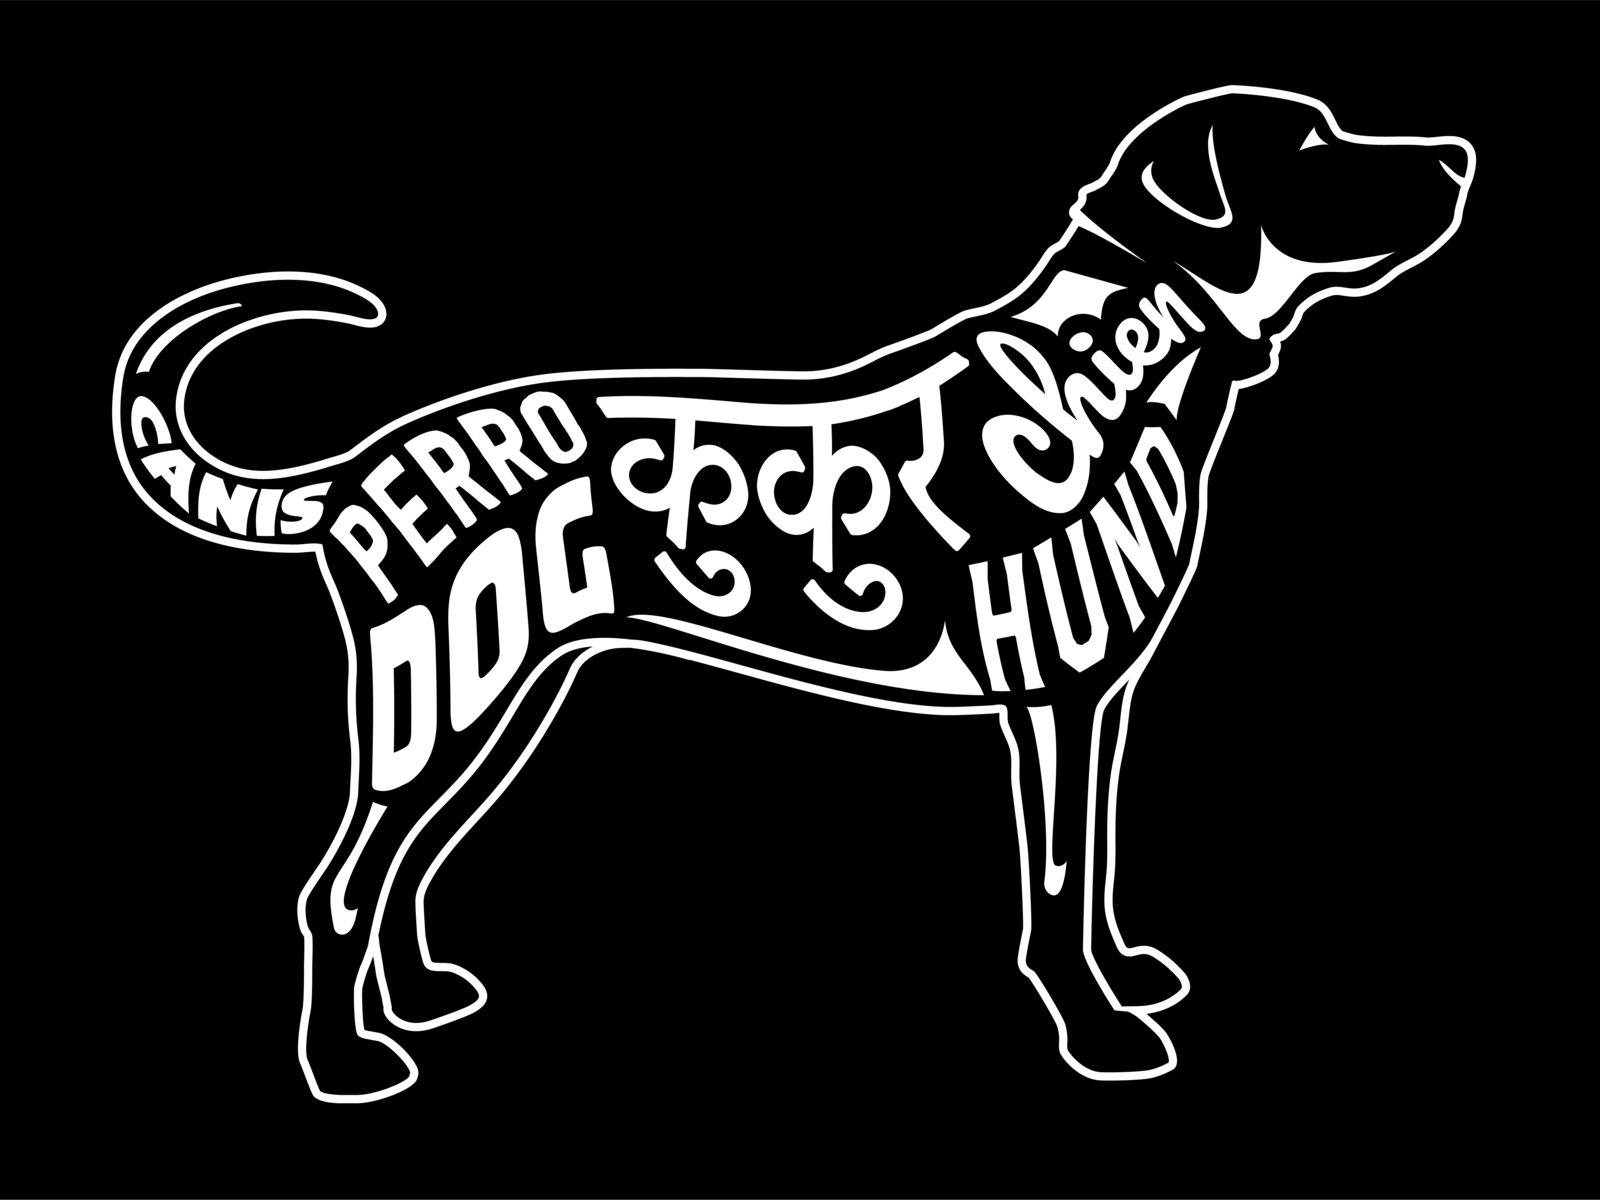 DOG by Blair Jacobs on Dribbble